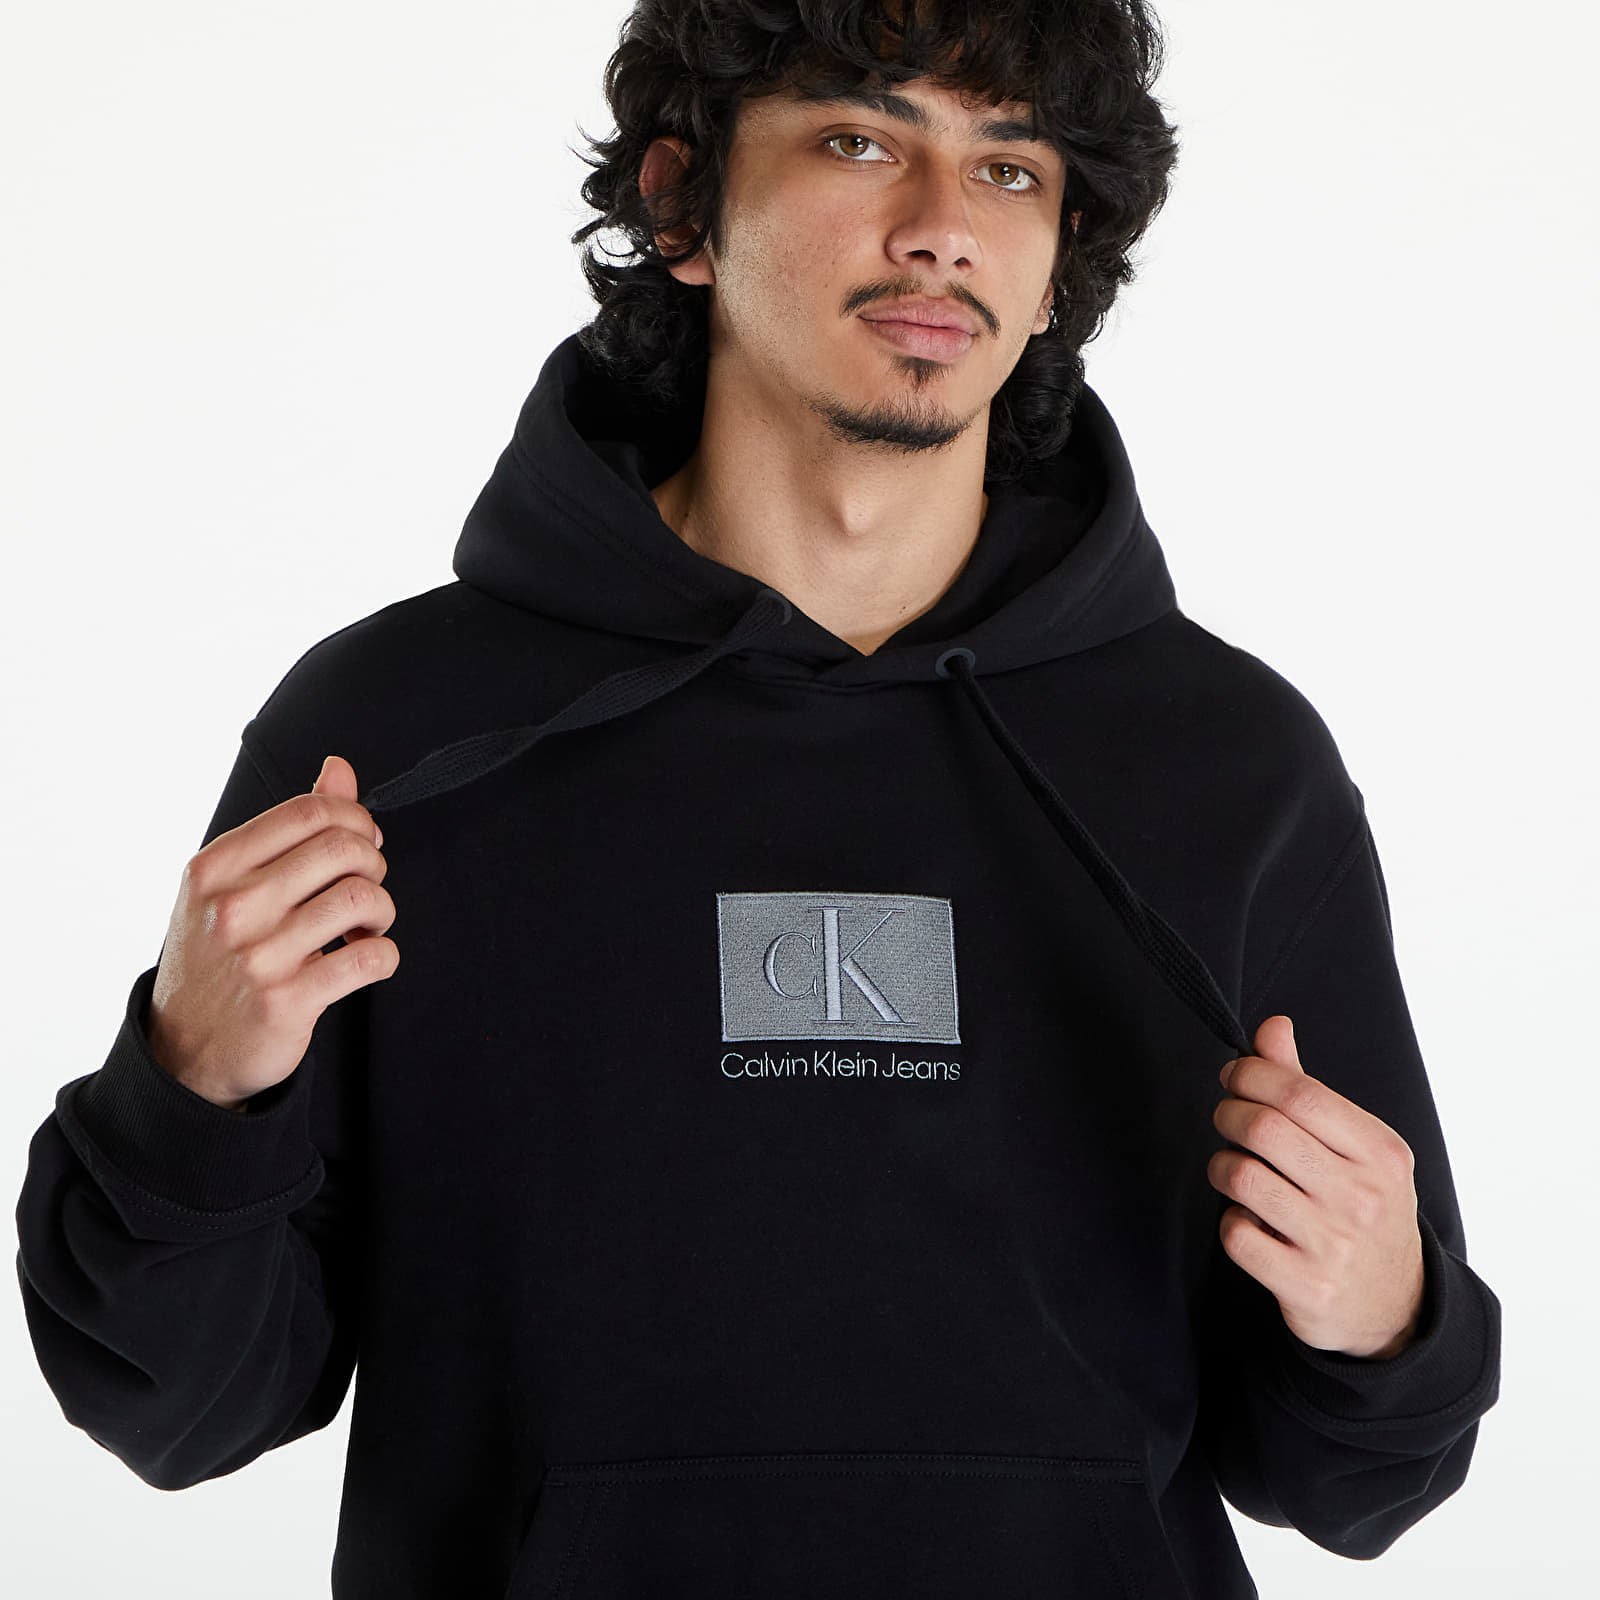 Embroidery Patch Hoodie Black